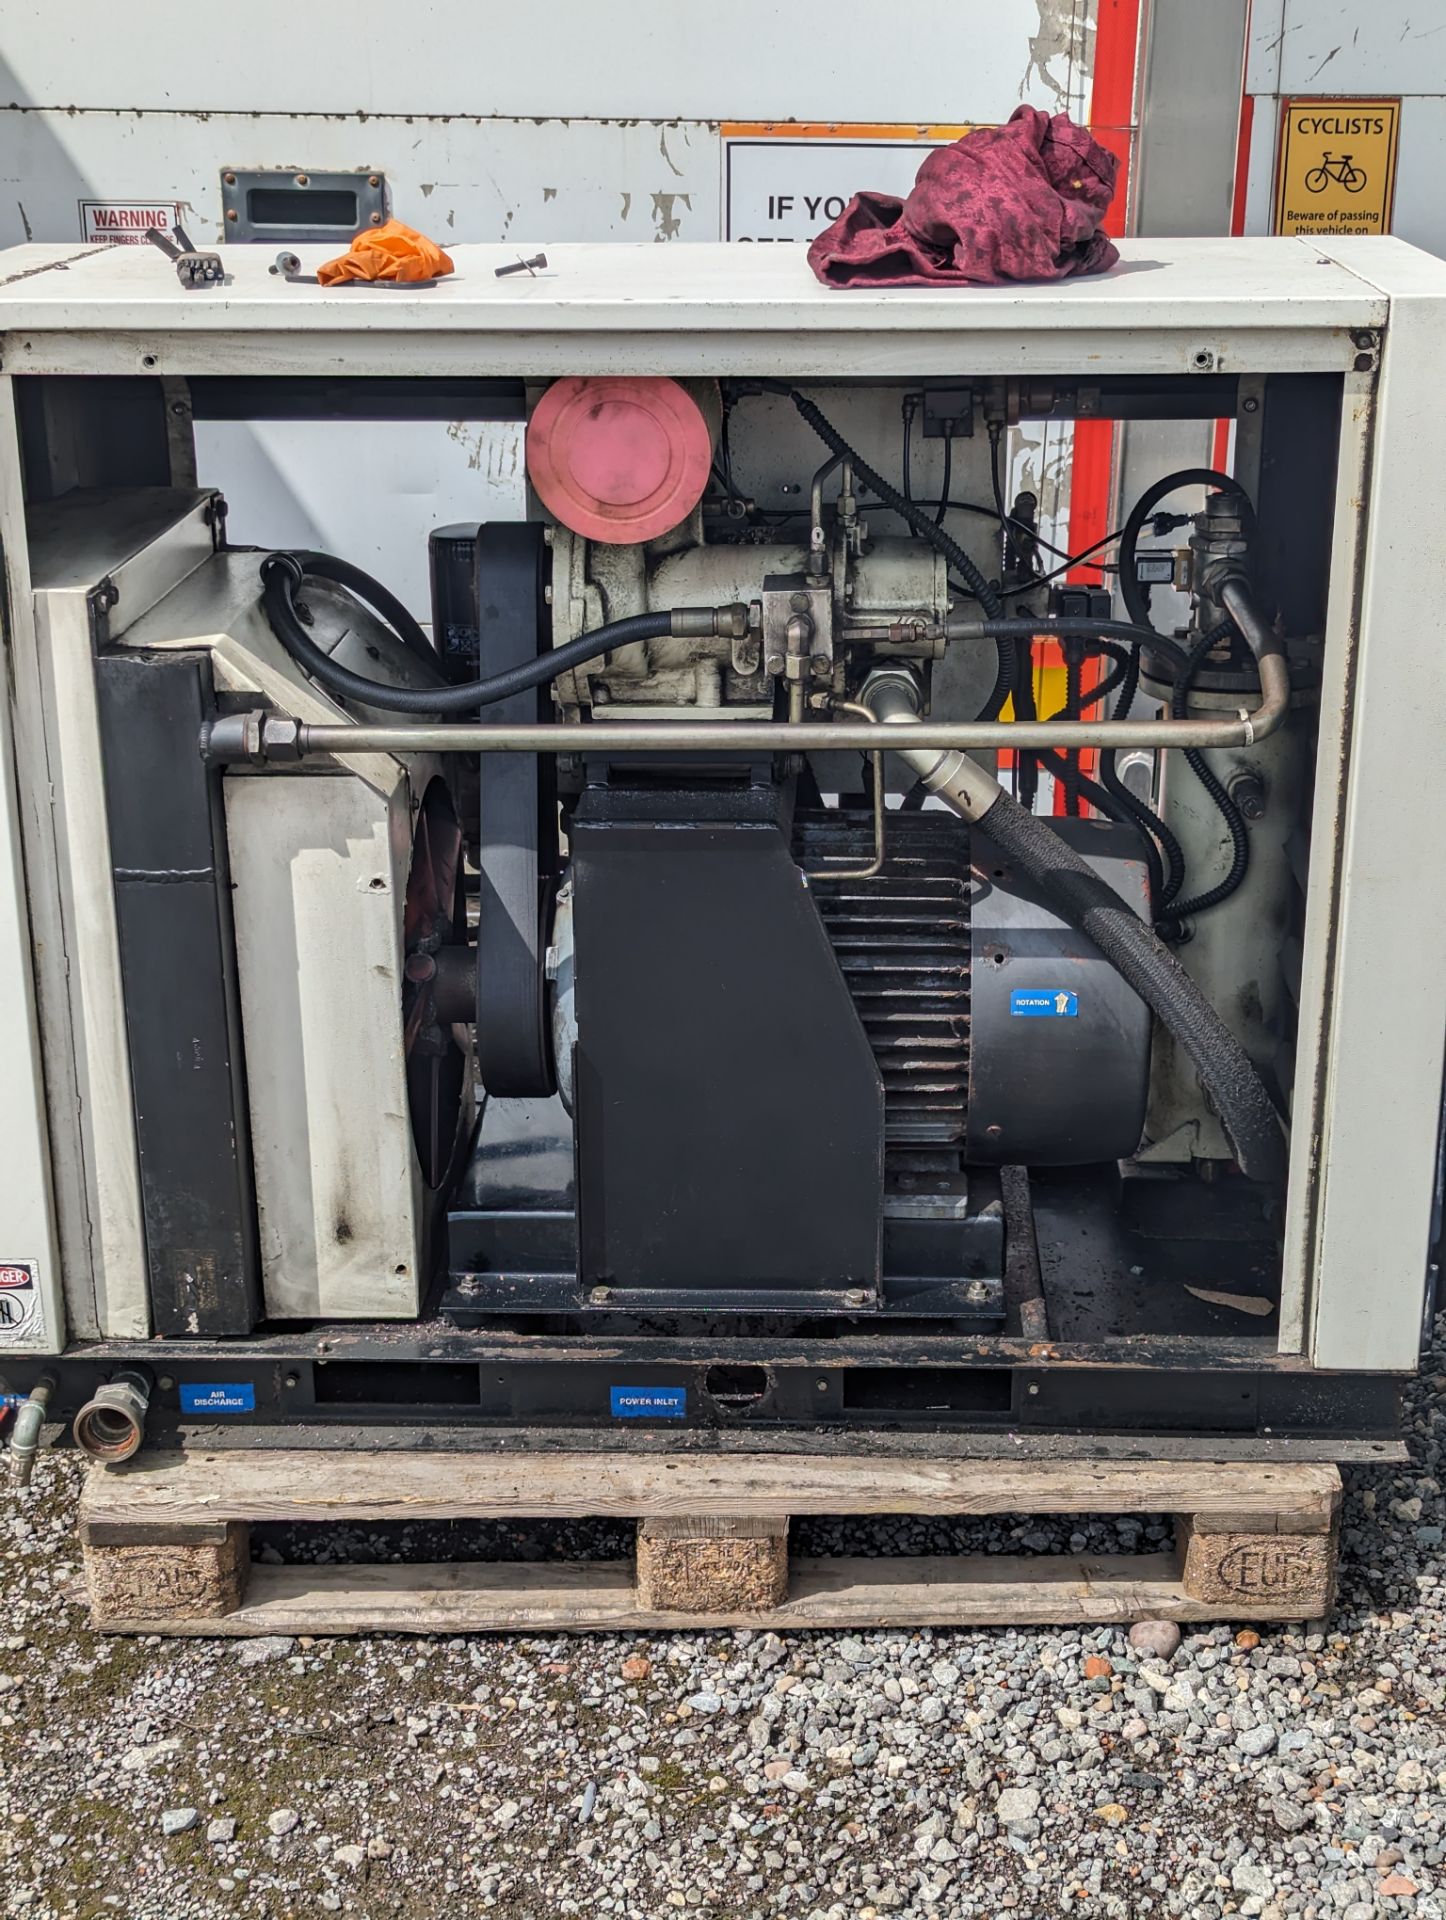 1 x Ingersoll Rand SSR ML 30 415v 3phase Air Compressor - Image 4 of 4